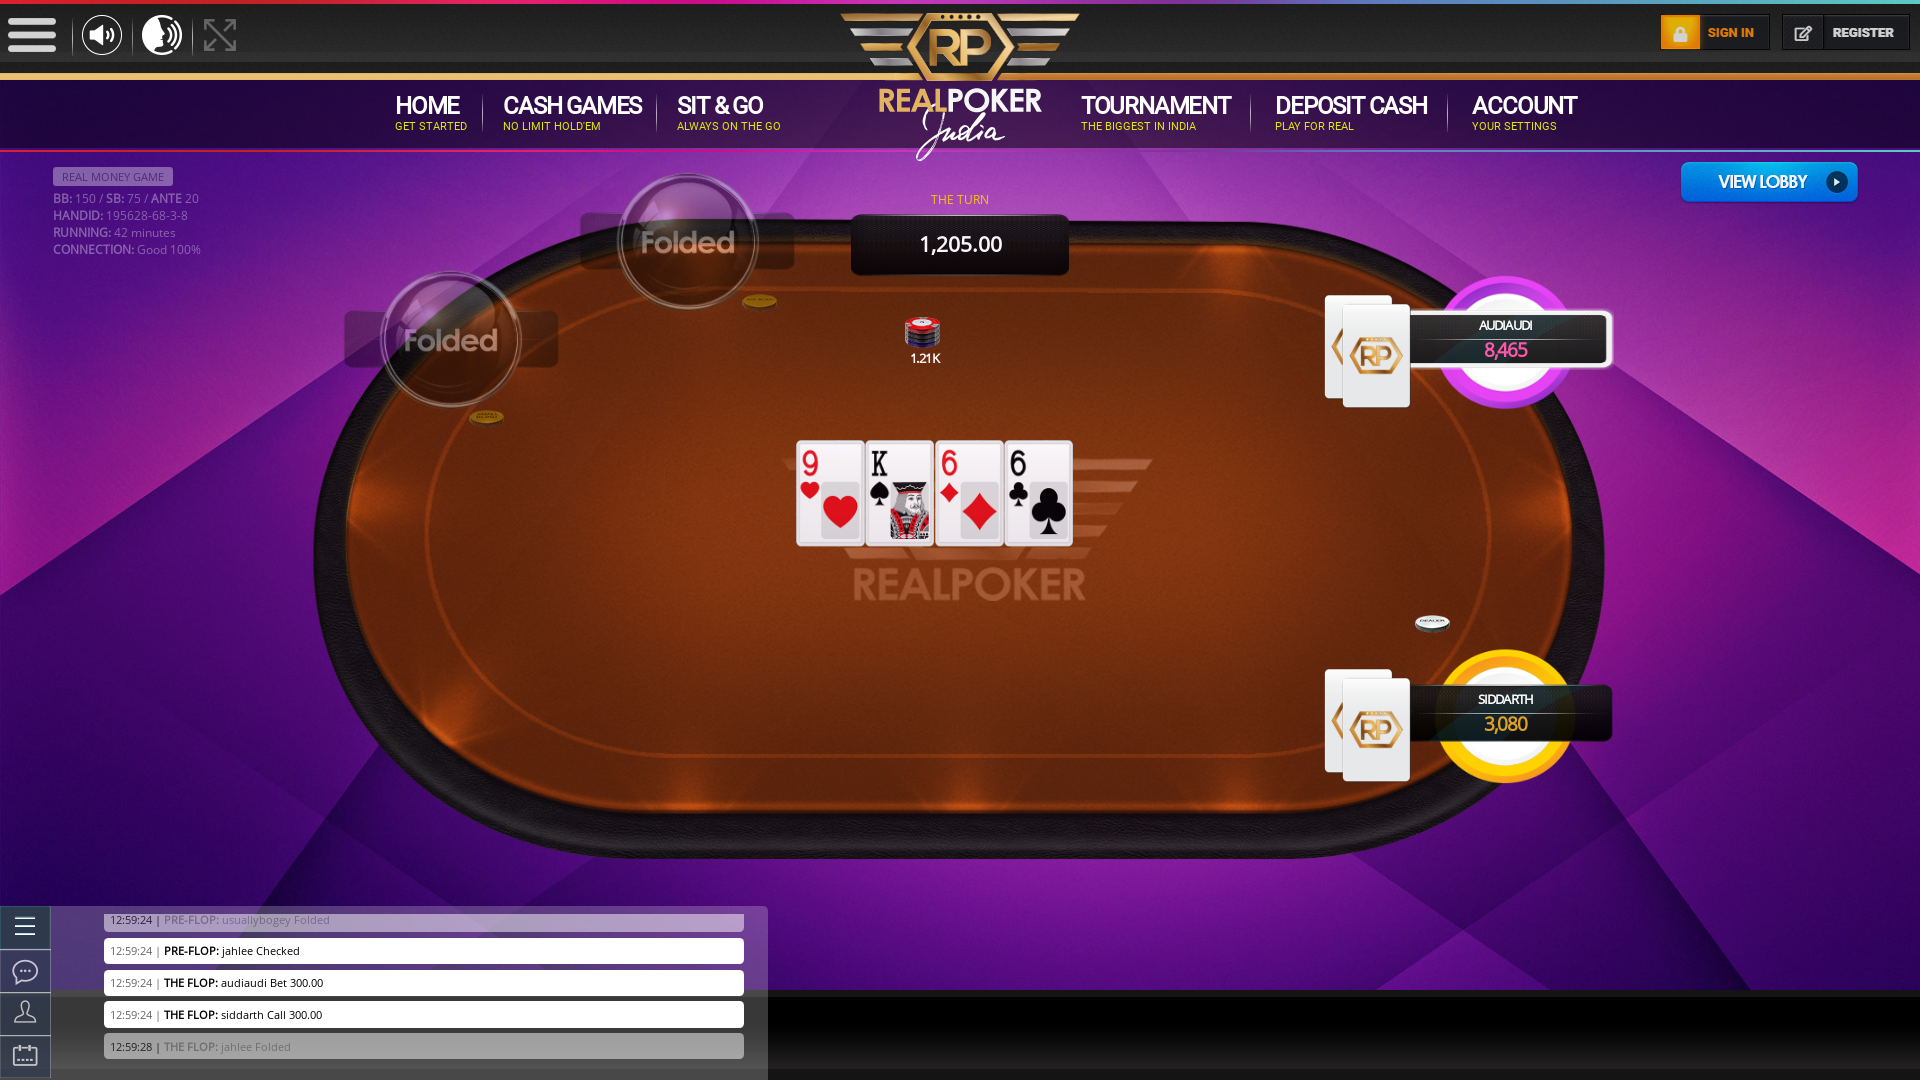 10 player poker in the 42nd minute